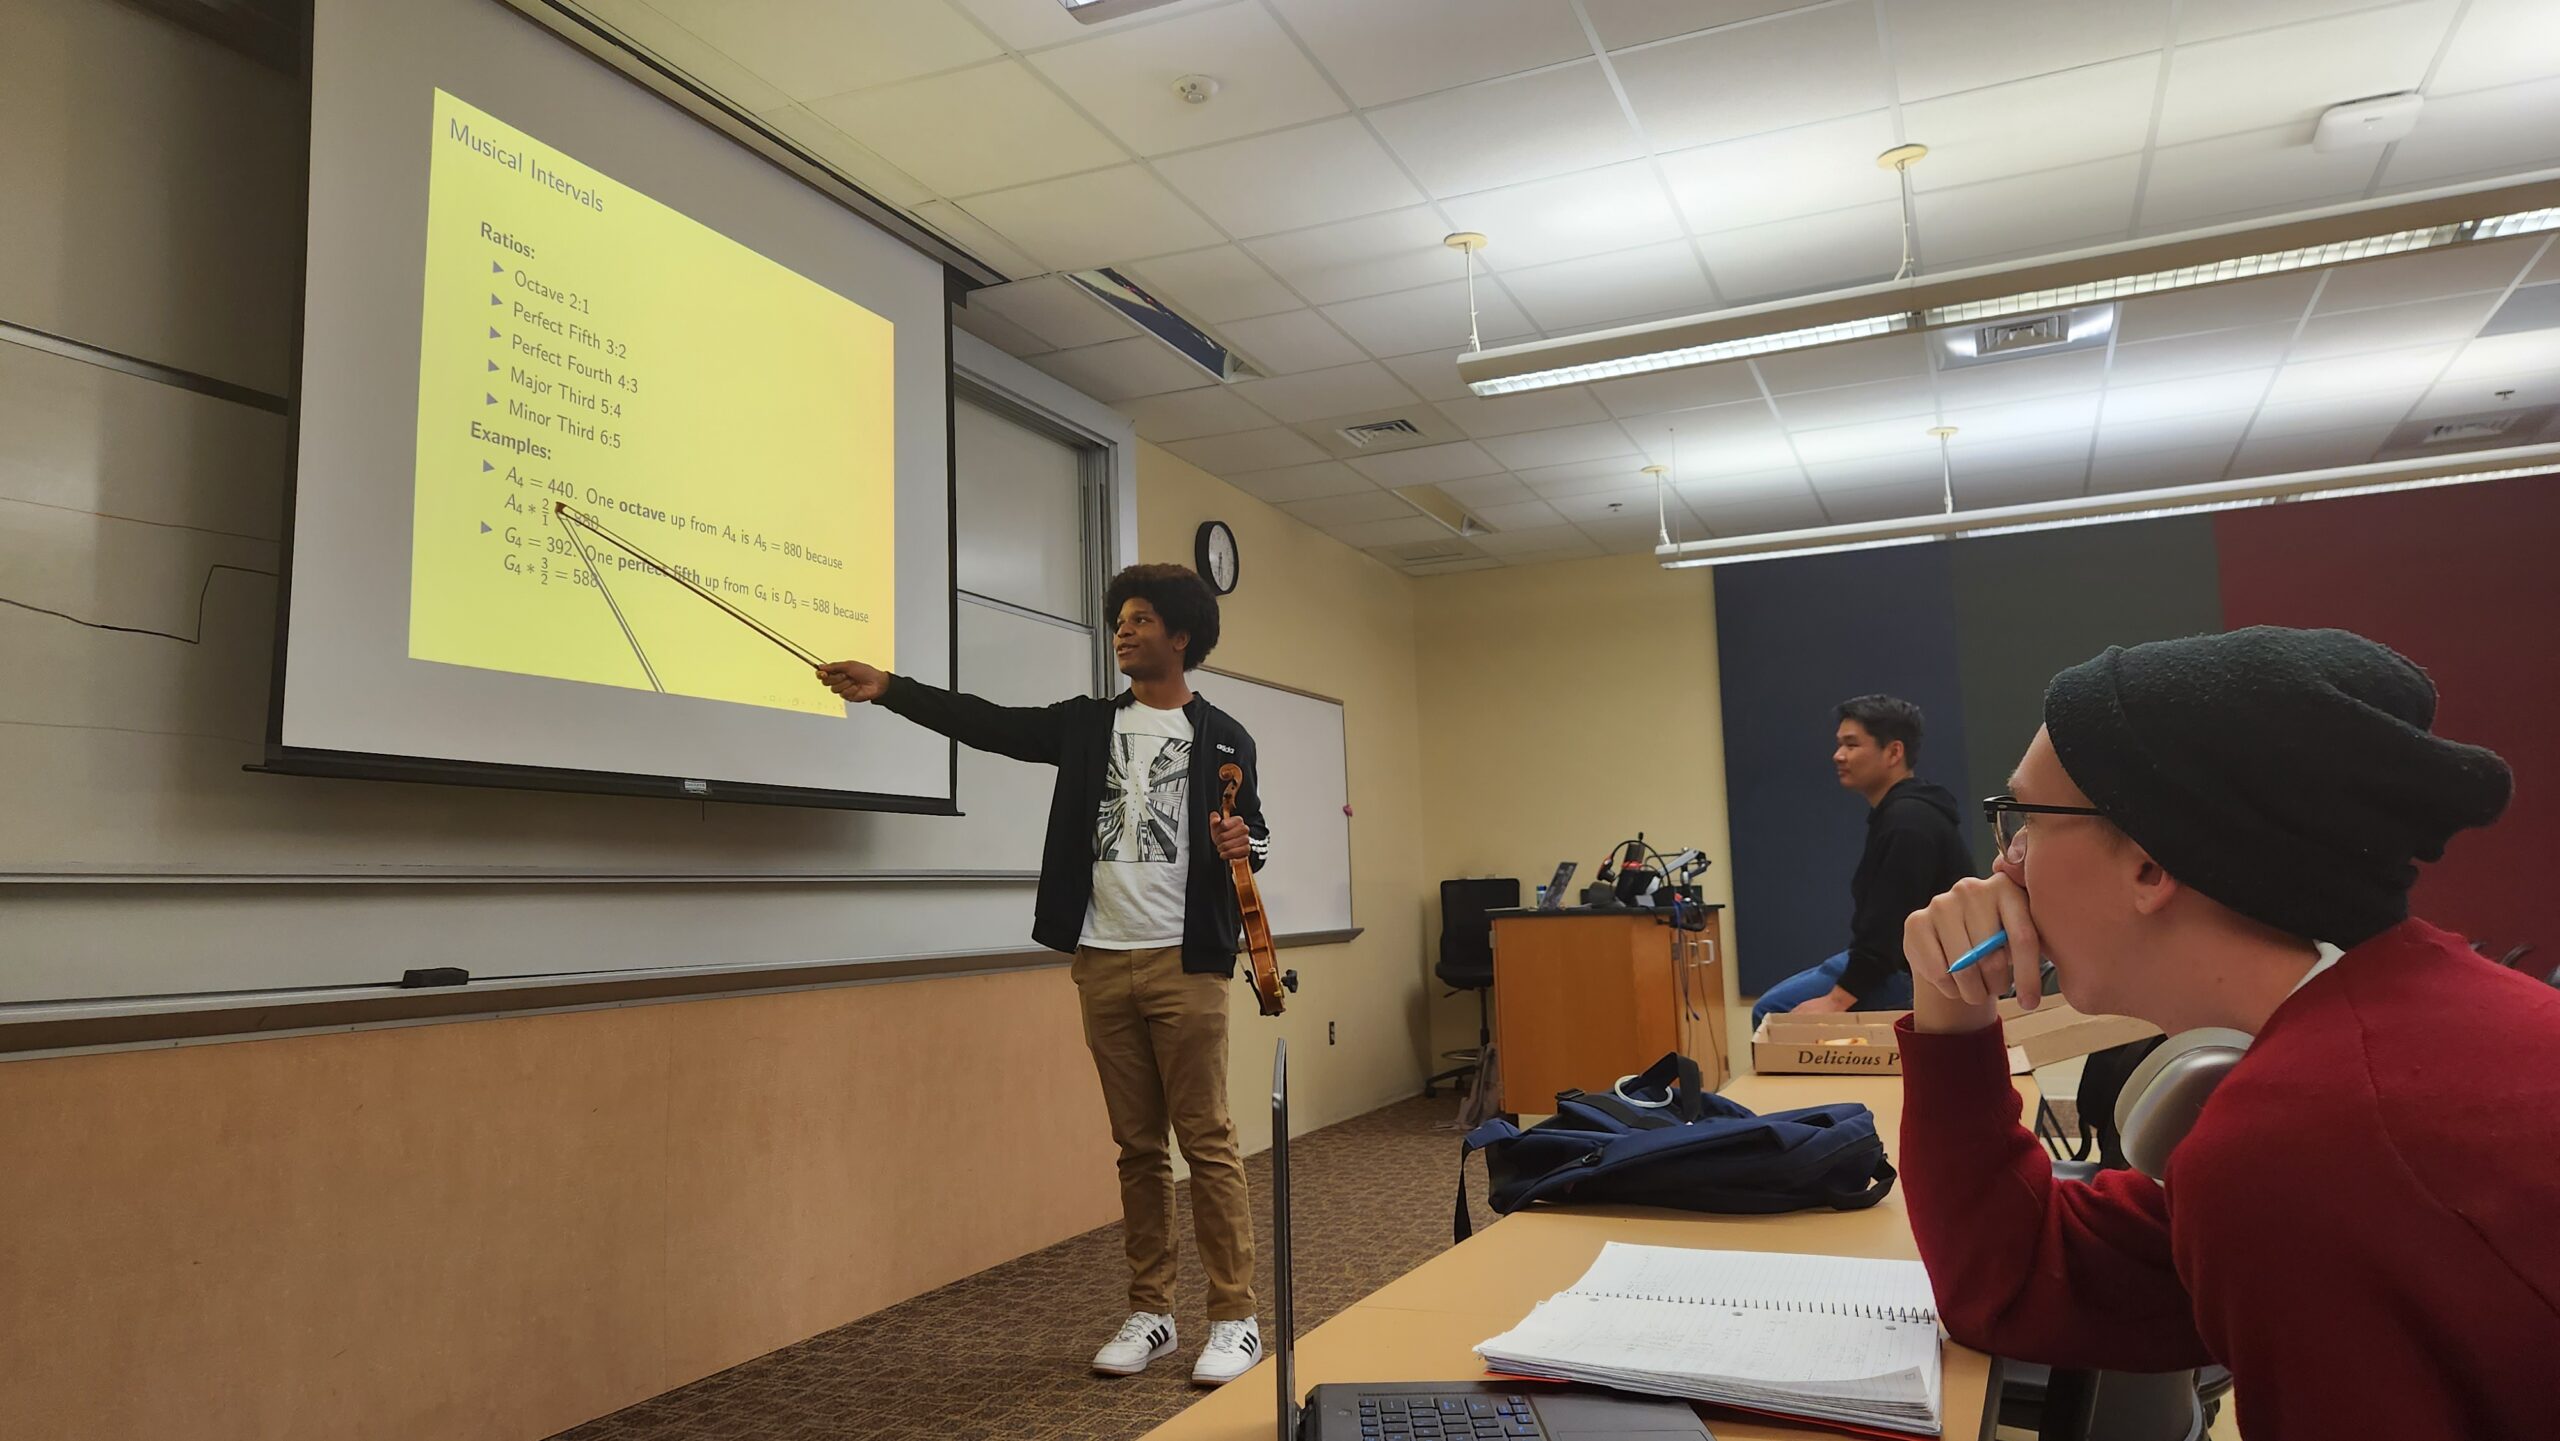 Student stands in front of a projector screen, holding a violin in one hand. In the other hand, he points at a presentation with a violin bow.